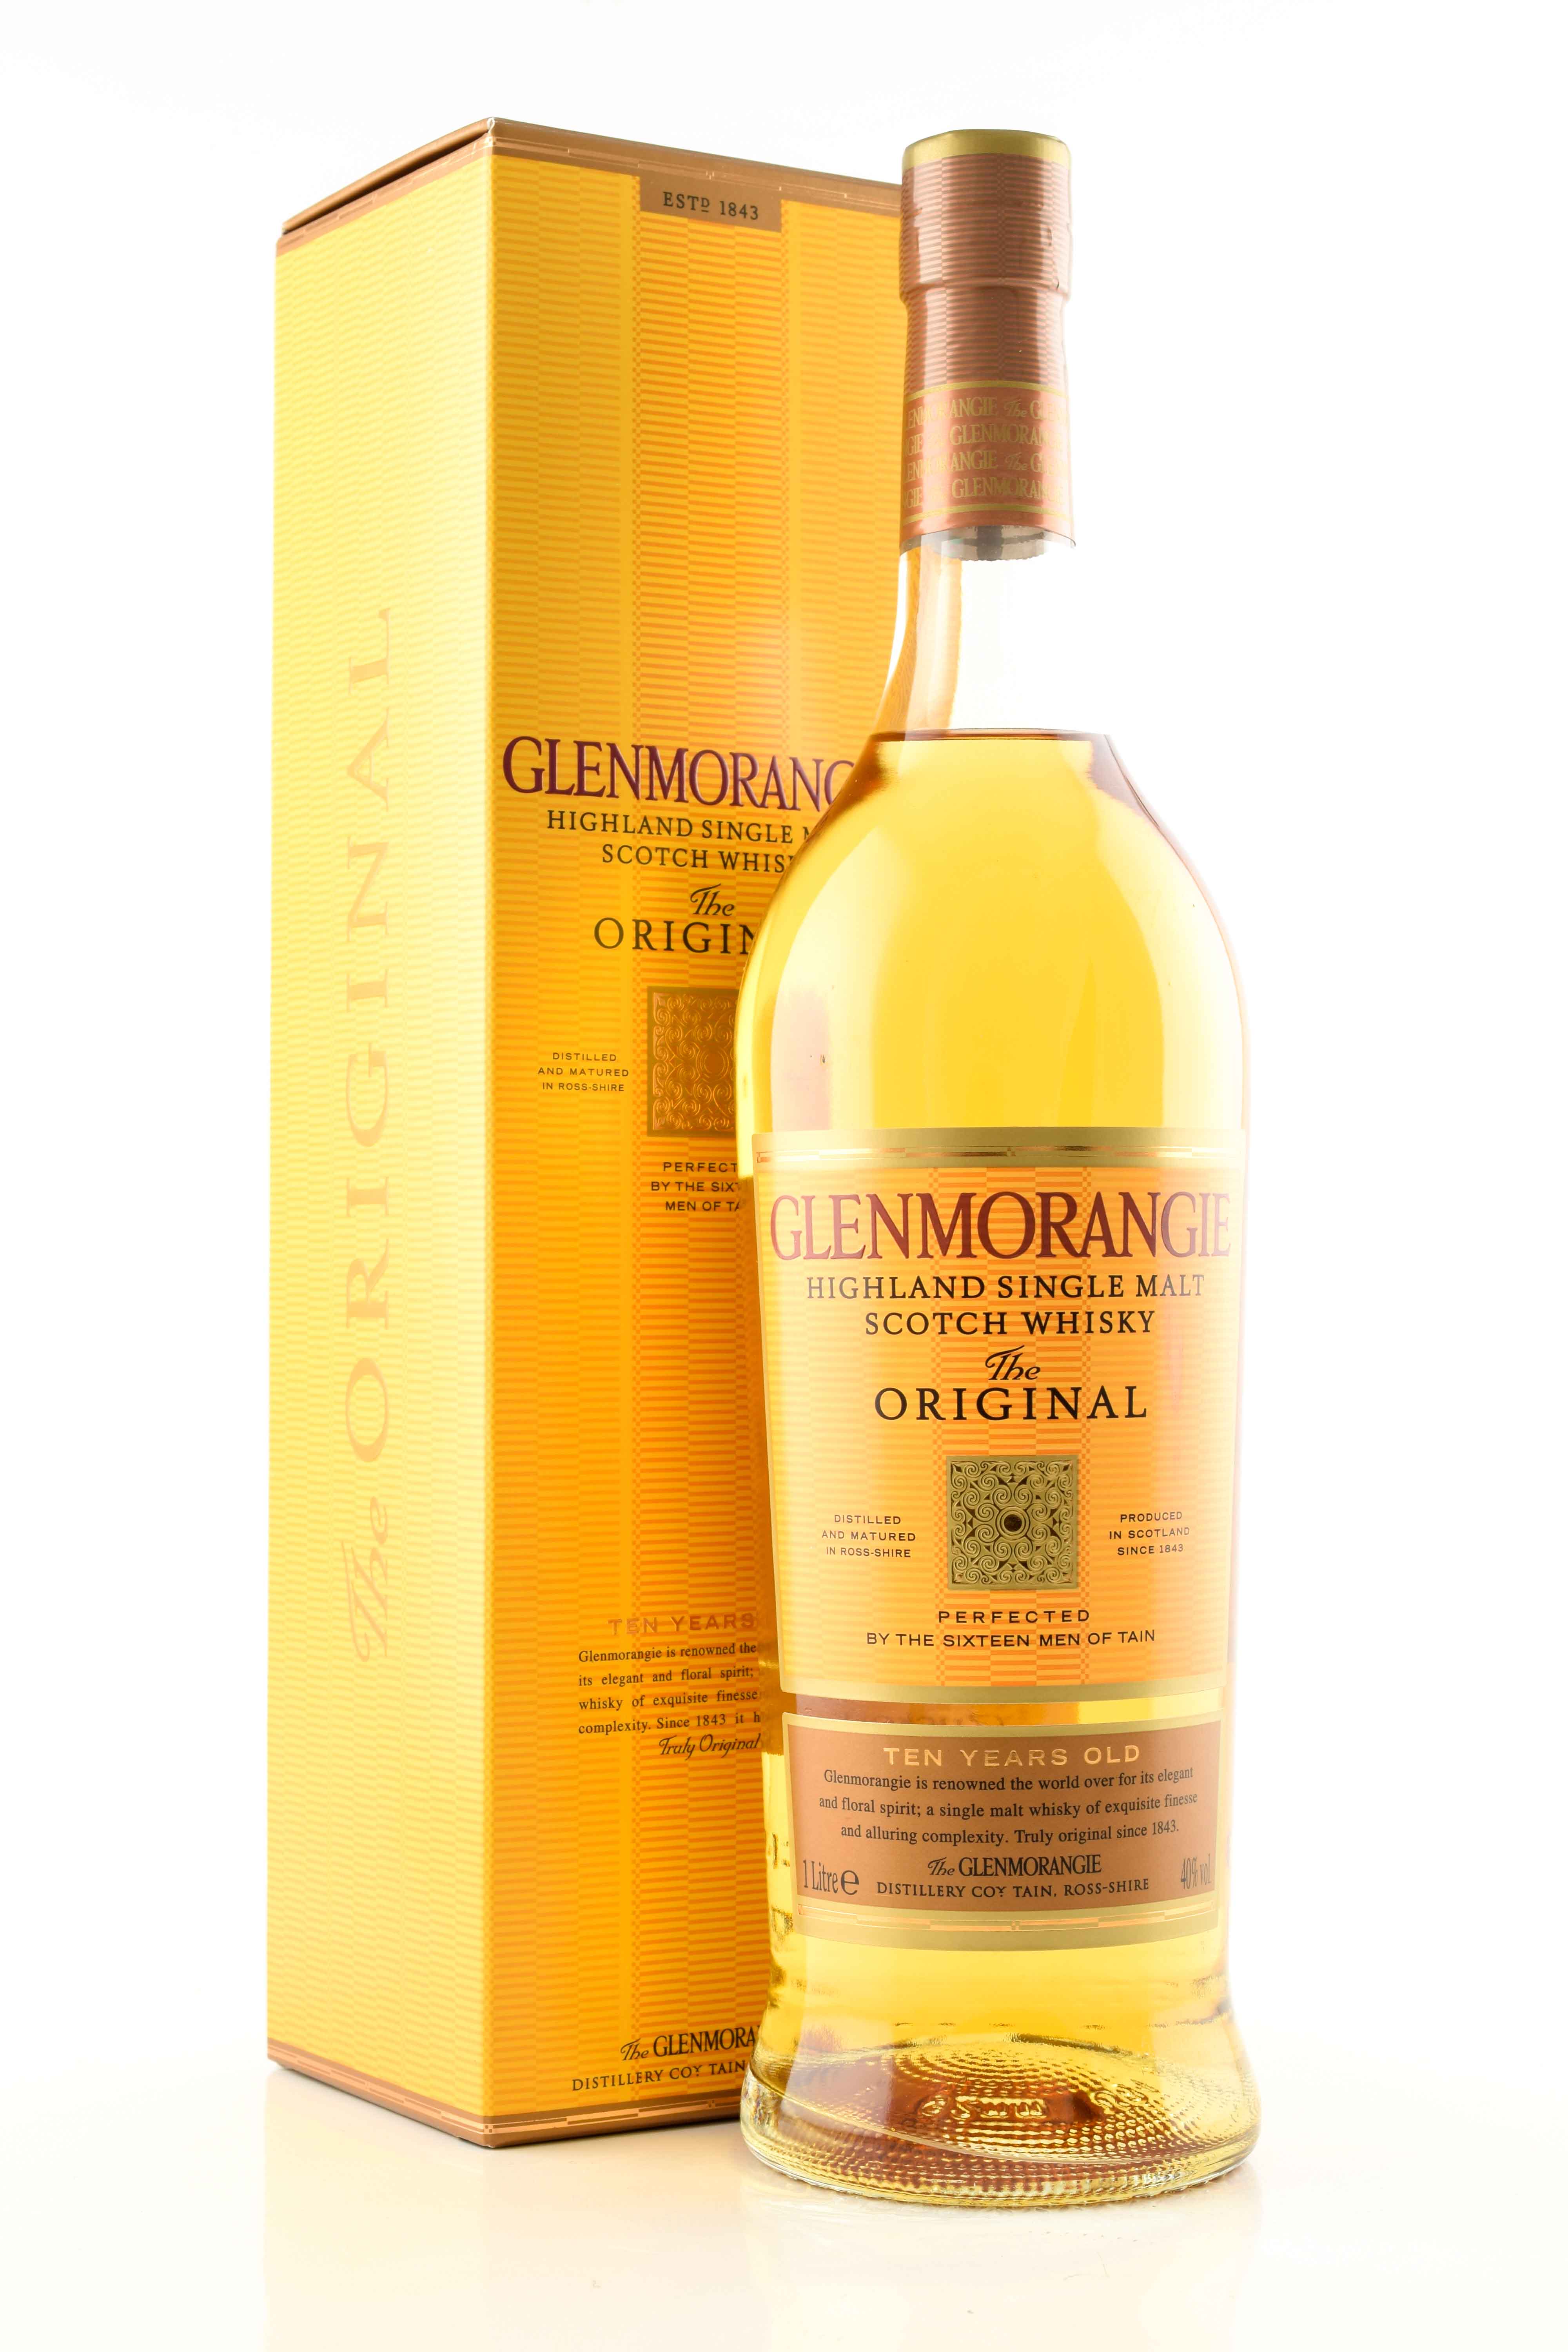 | of Scotch | Whisky Glenmorangie Old Original 1.0L Year Highlands Malts vol. | Countries 40% Home Whisky | The | 10